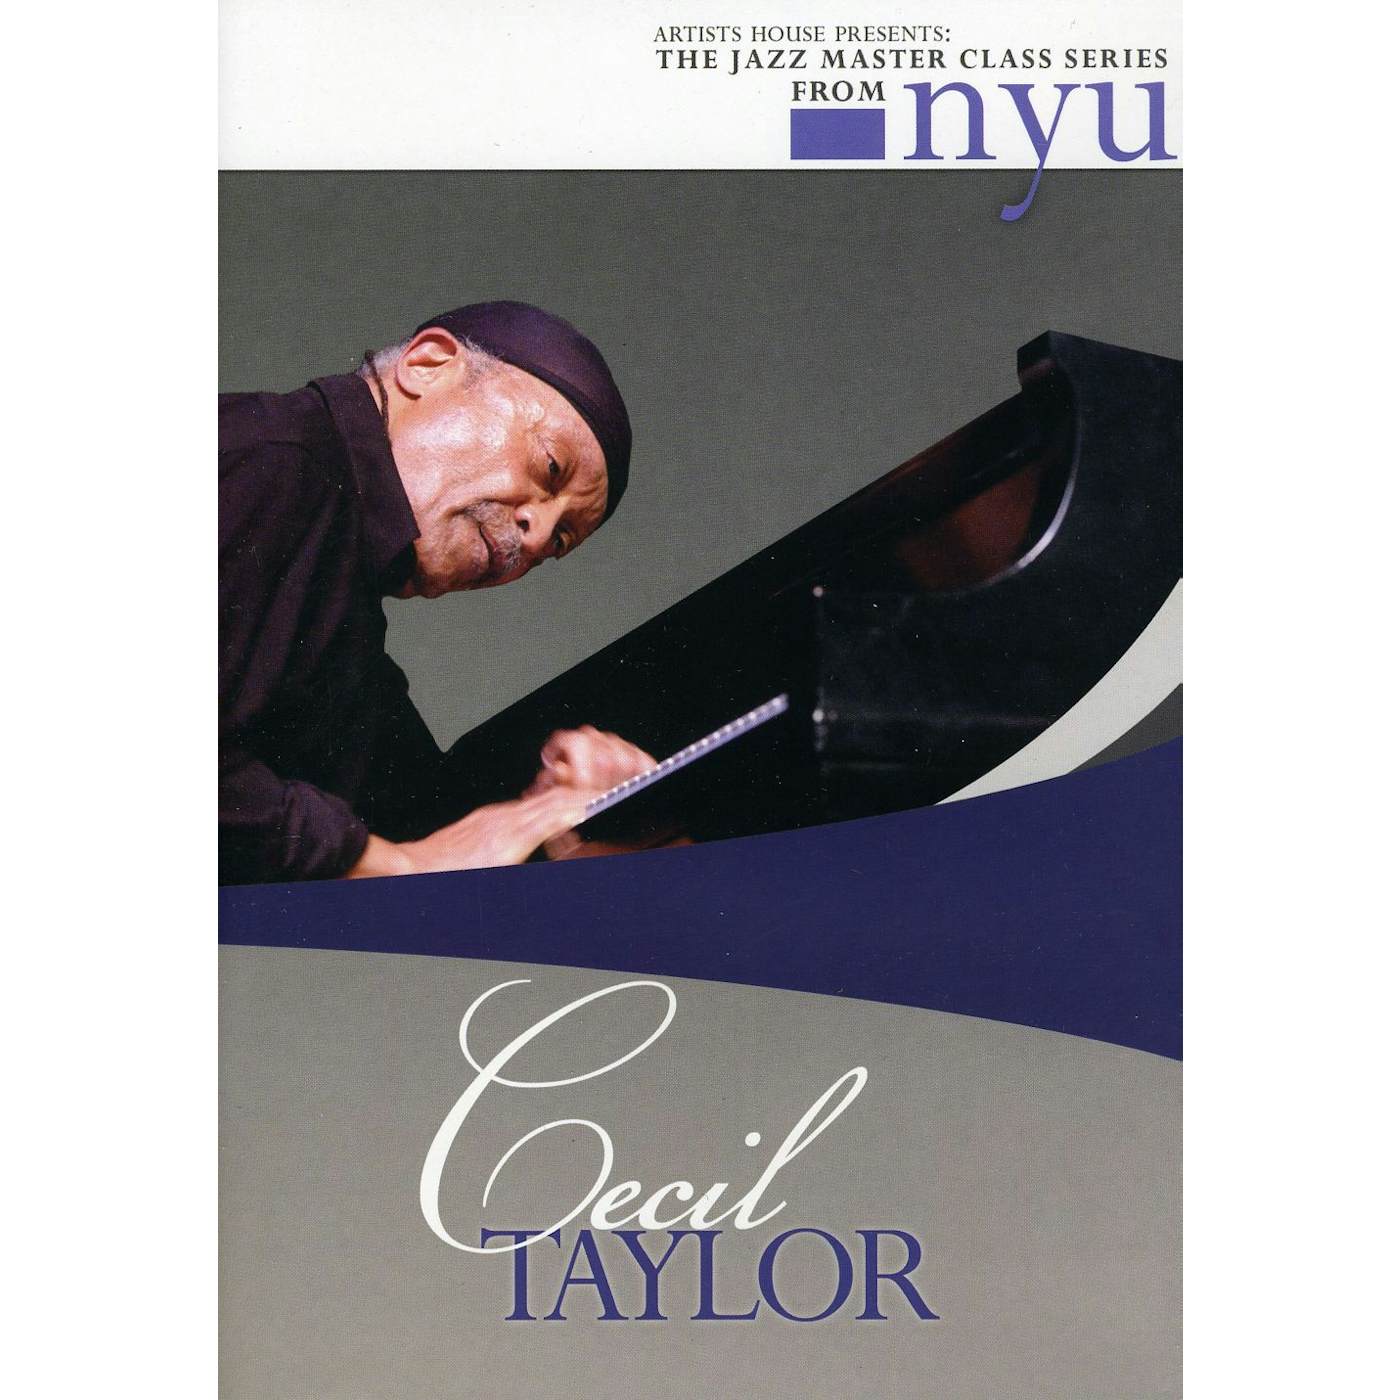 Cecil Taylor JAZZ MASTER CLASS SERIES FROM NYU DVD